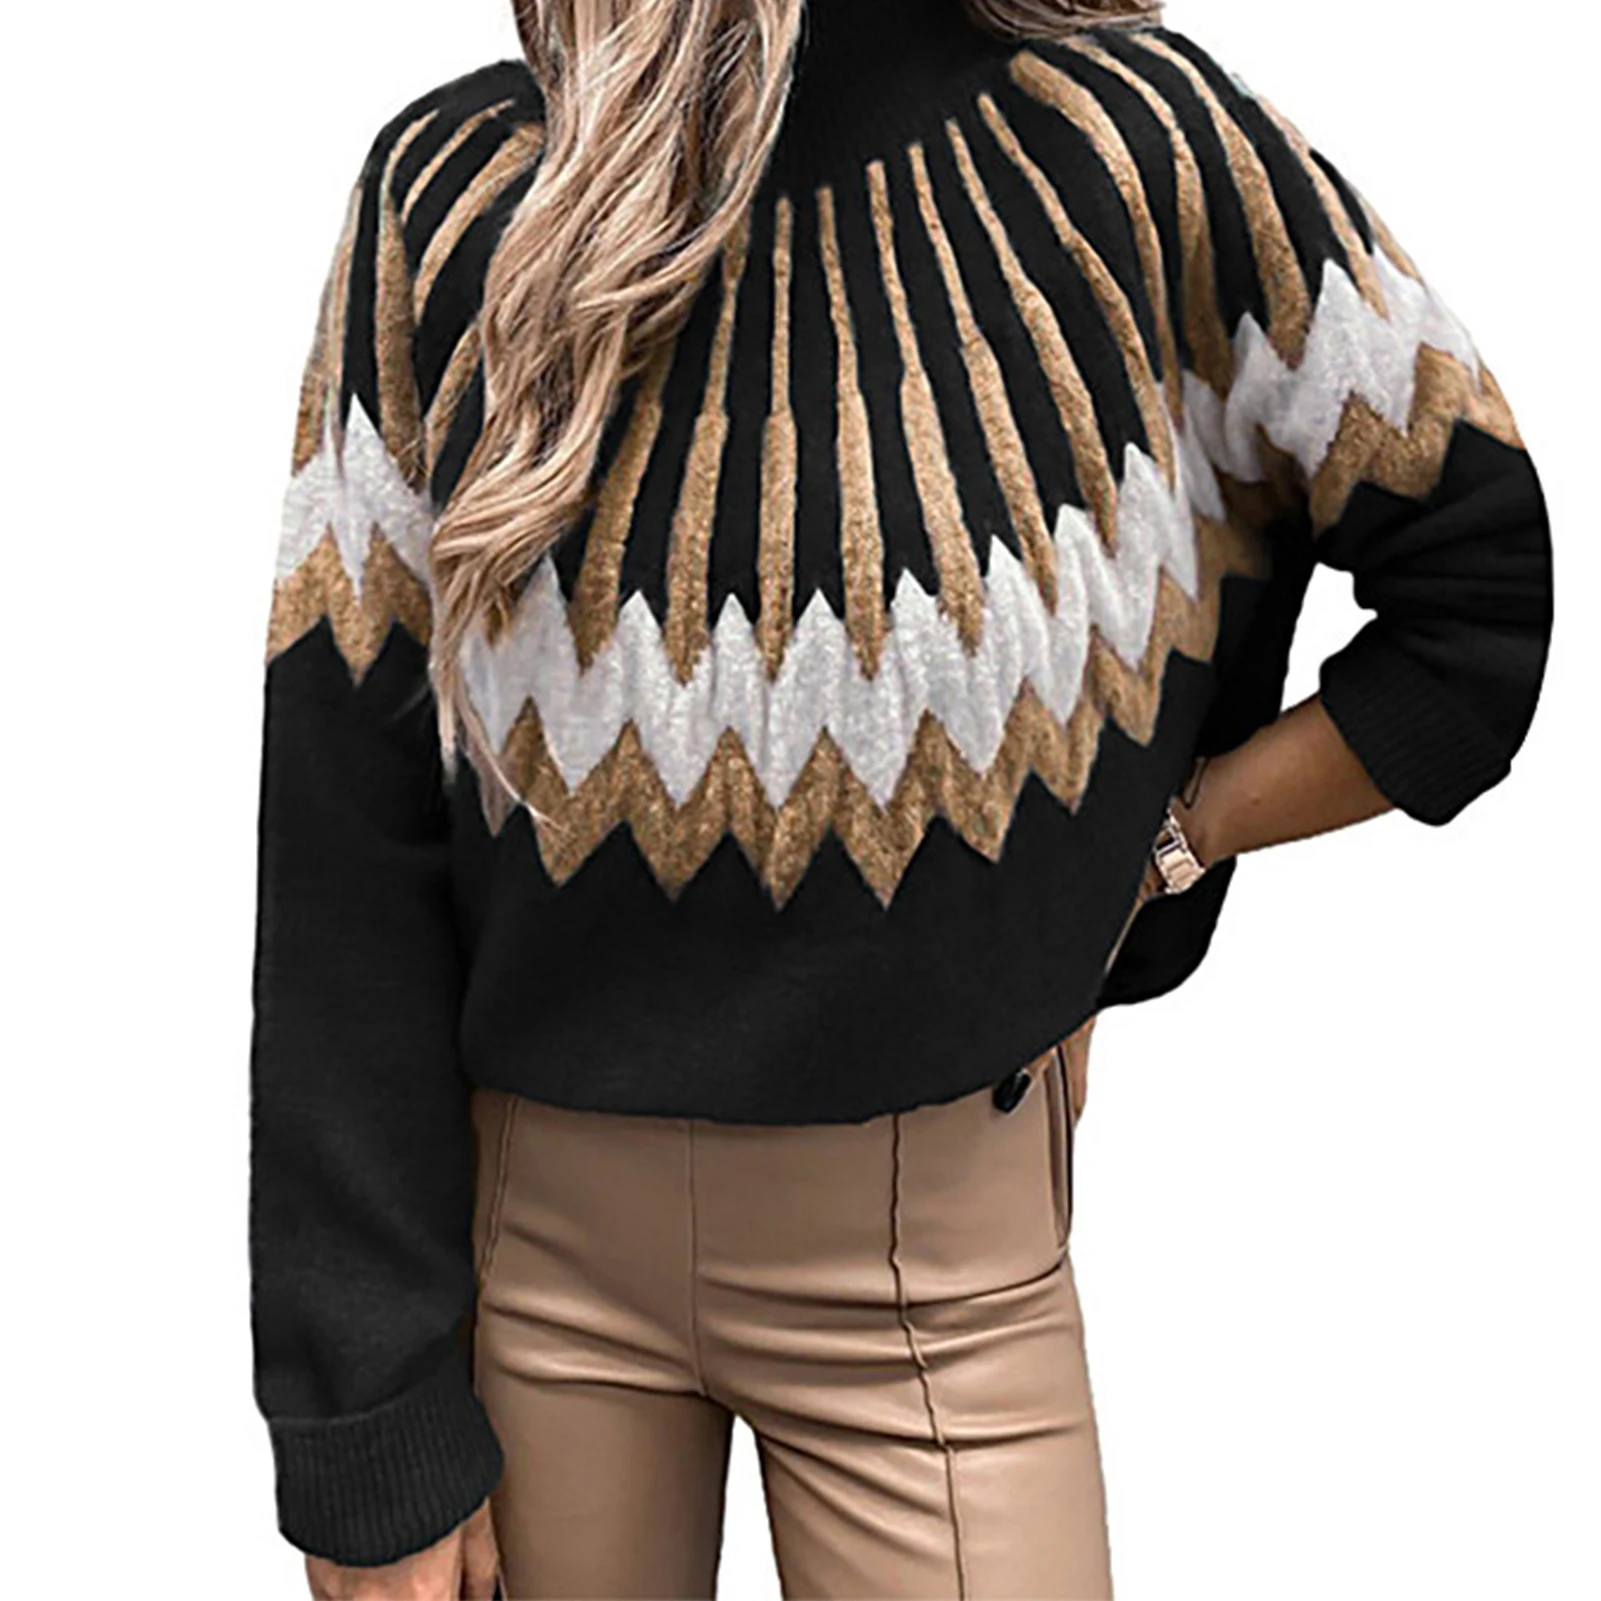 

Woman Long Sleeve Knitwear Fashionable and Attractive Suitable for Friends Gathering Wear